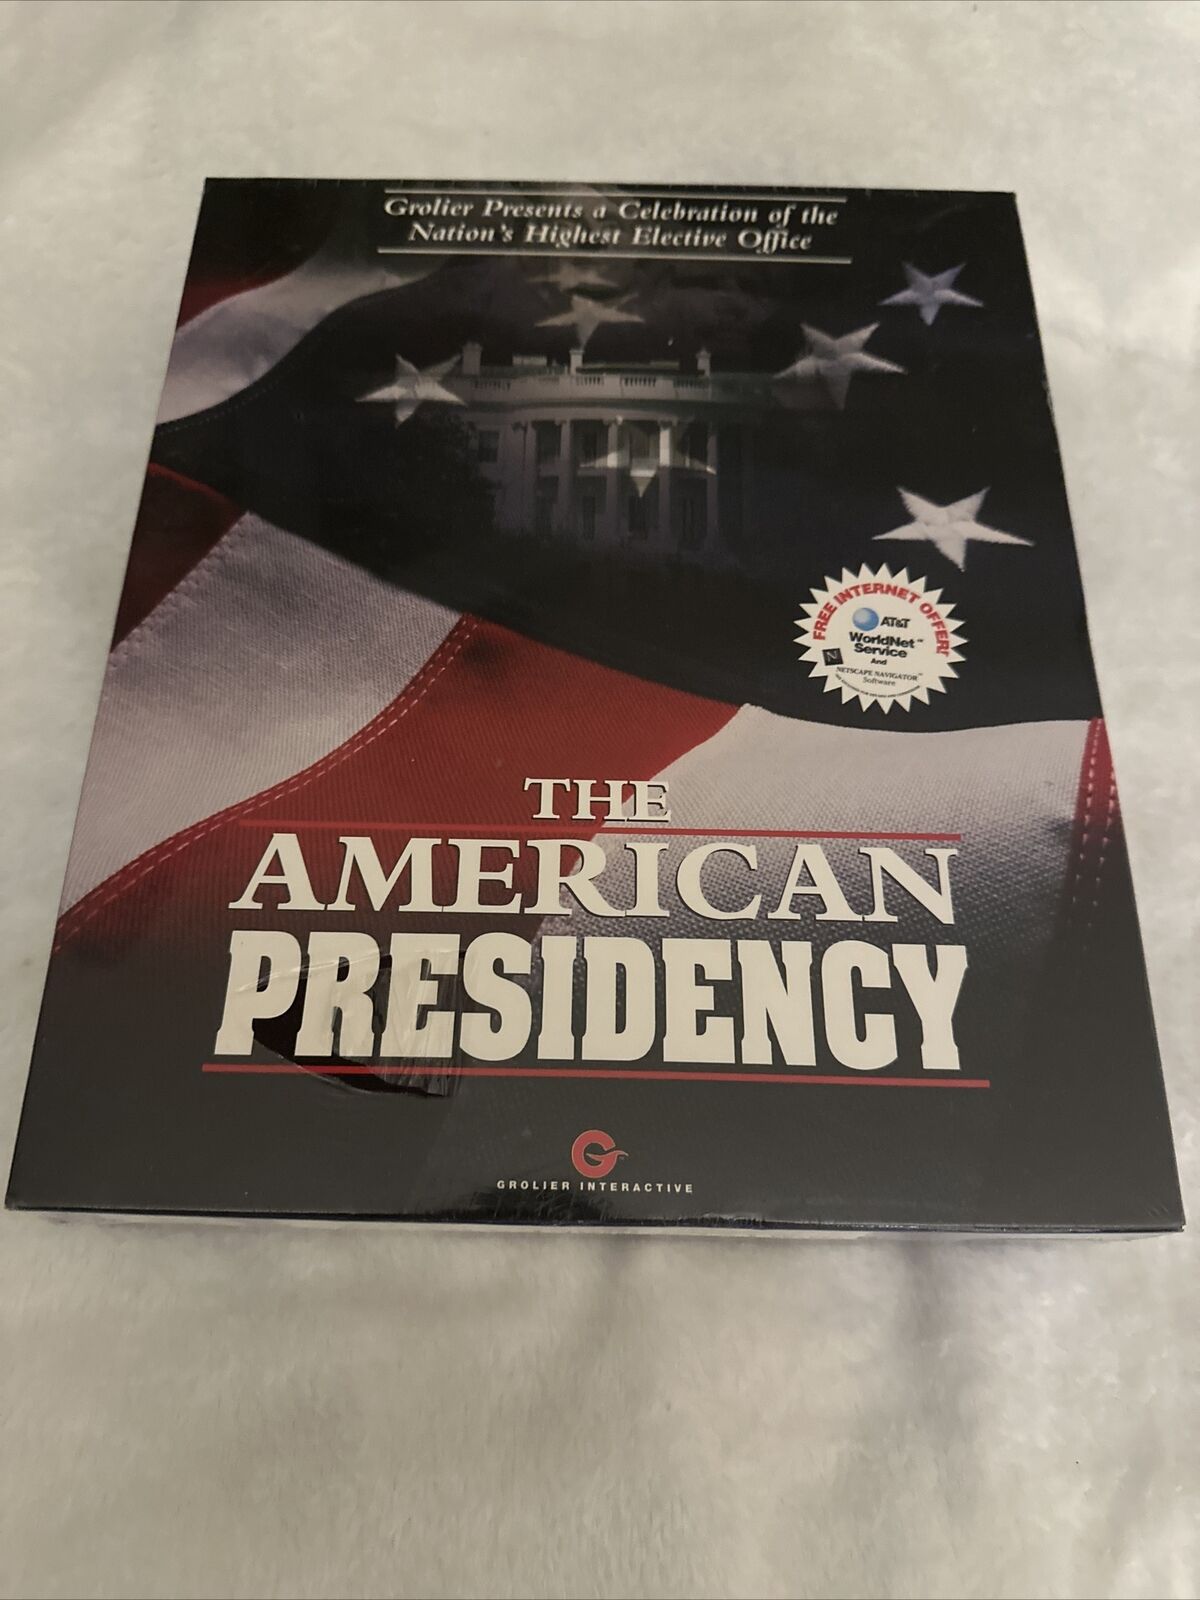 Vintage THE AMERICAN PRESIDENCY, historical CD-ROM, Grolier Interactive 1997 NEW